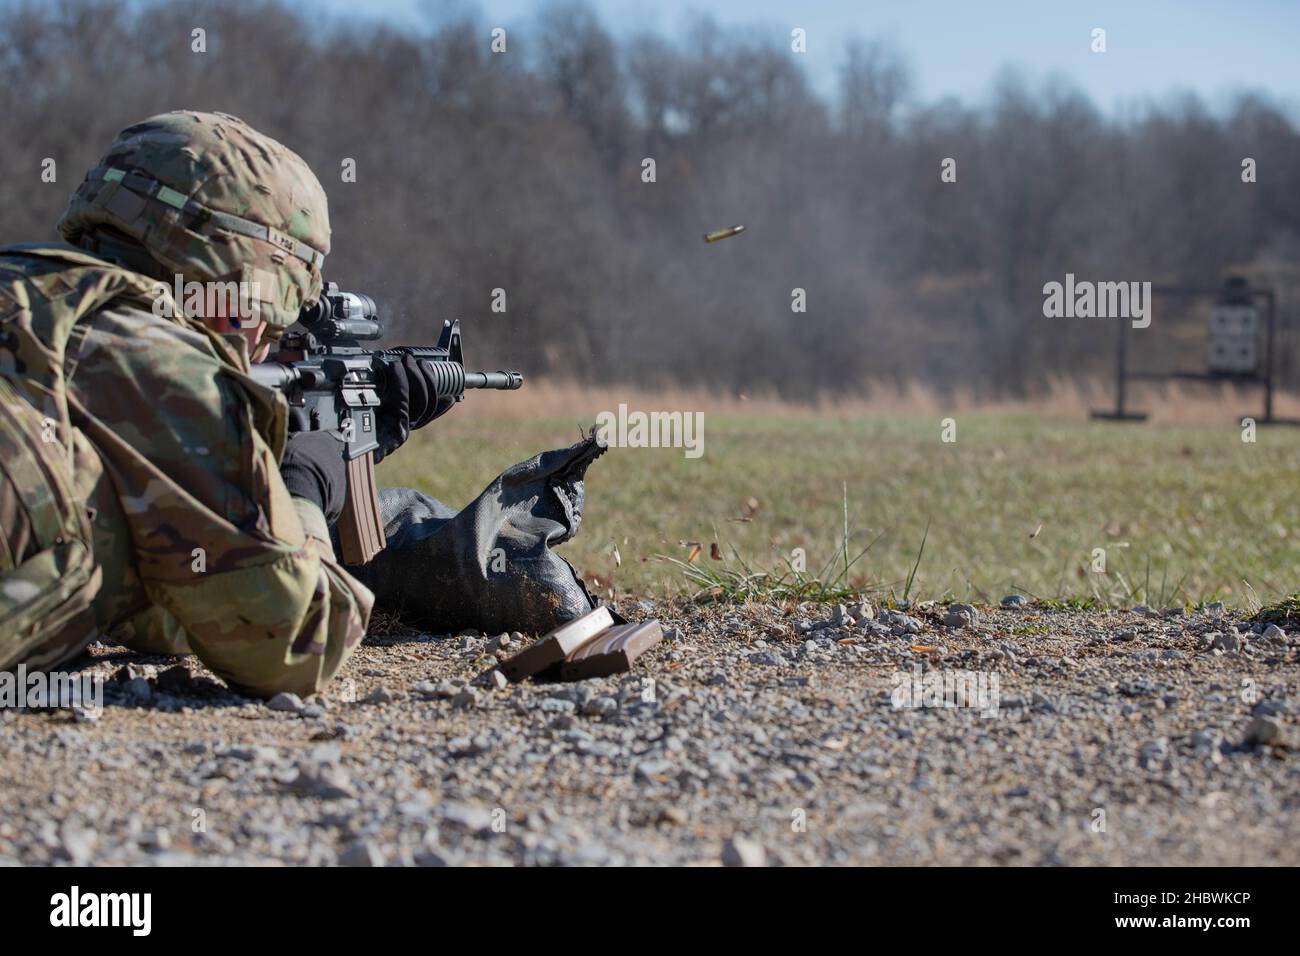 FORT KNOX, Ky. (Dec. 15, 2021) – V Corps Soldier Spc. Meghan Langford fires  her M4 rifle during an M4 qualification range at Fort Knox, Kentucky, Dec.  8. Quarterly qualification increases a